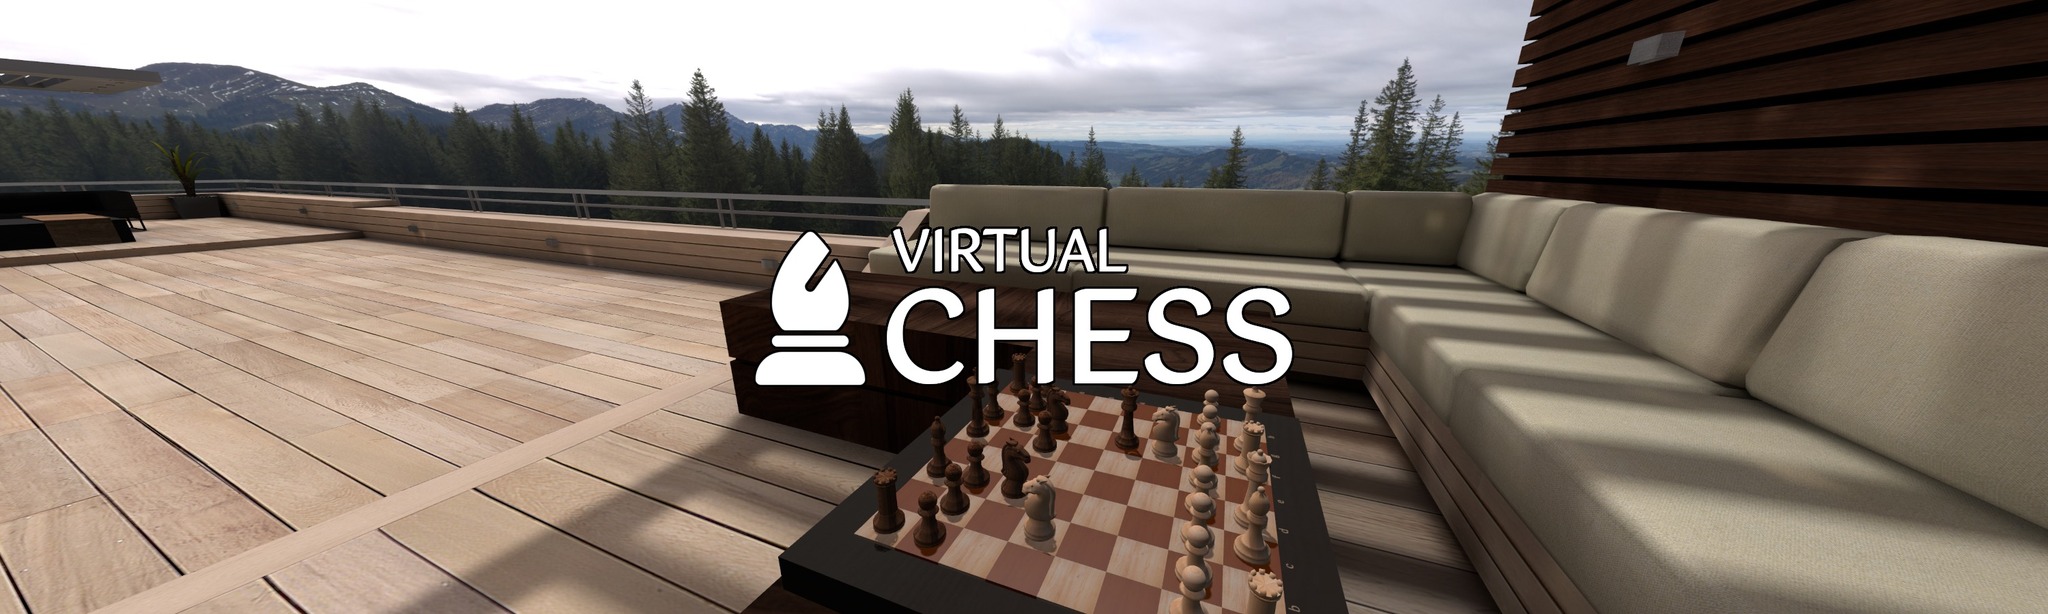 Ready go to ... https://sidequestvr.com/app/7927/virtual-chess [ Virtual Chess on SideQuest - Oculus Quest Games & Apps including AppLab Games ( Oculus App Lab )]